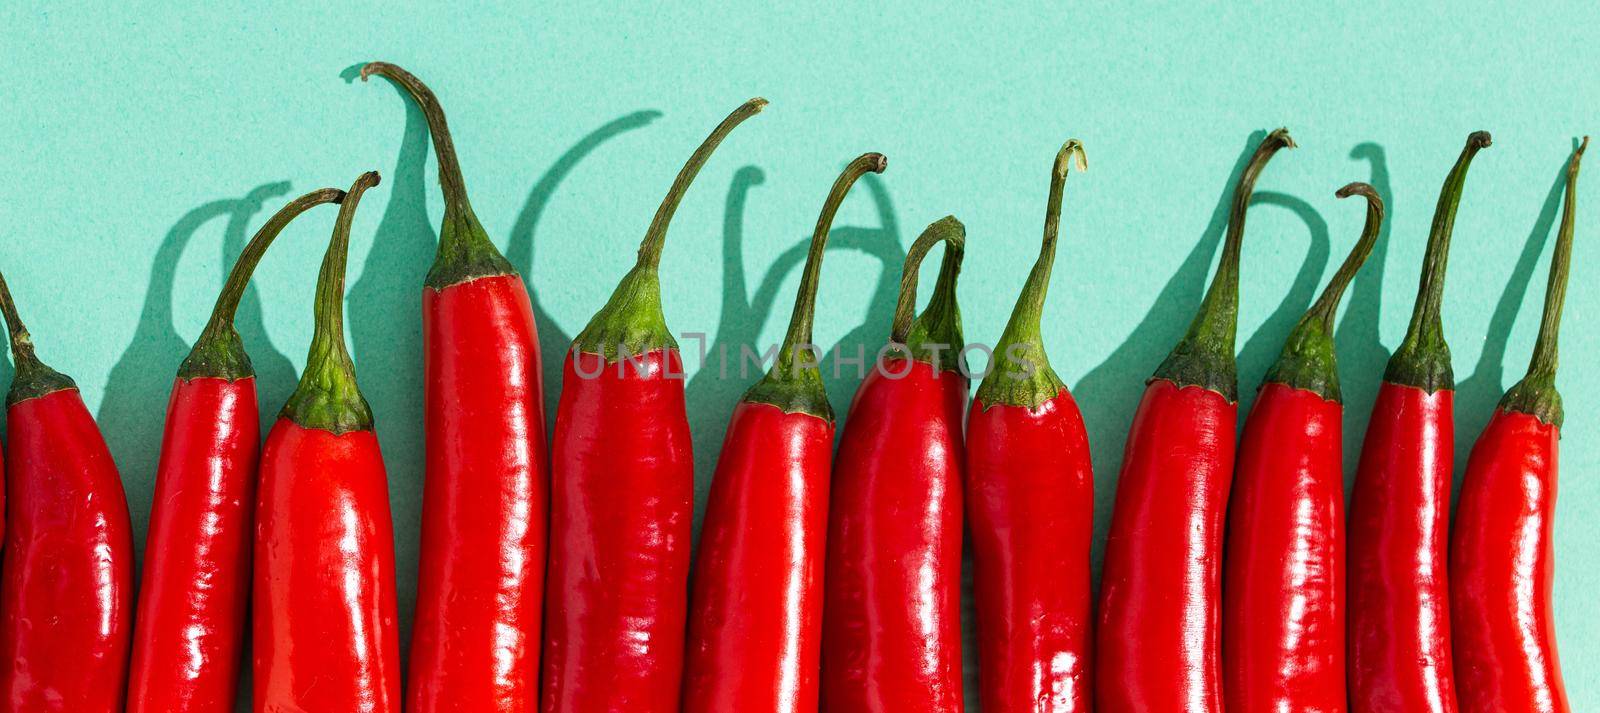 Red hot chilli peppers on minimal blue contrast background by its_al_dente